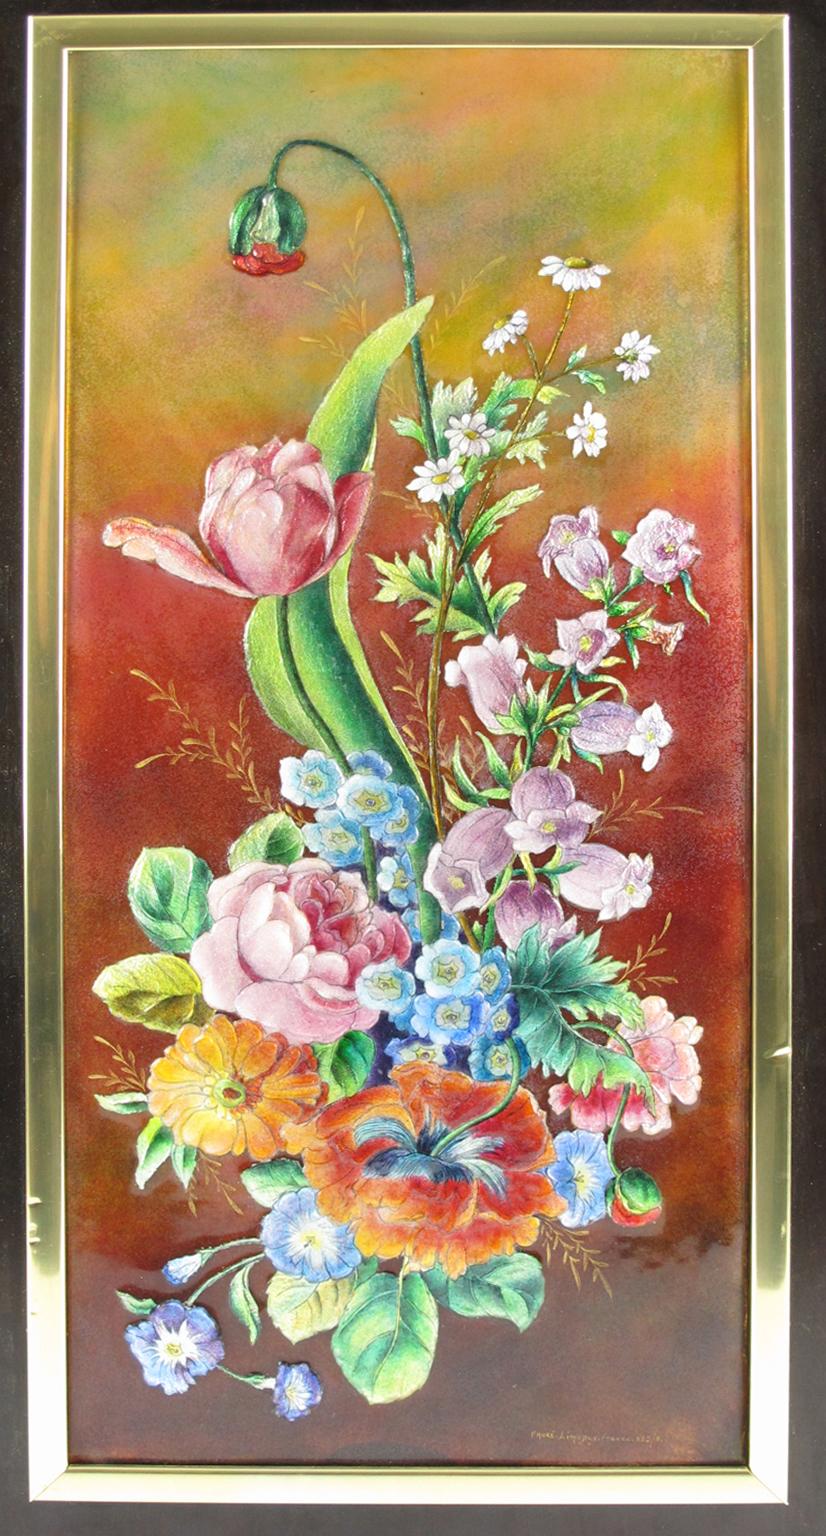 Camille Faure Studio handcrafted this lovely decorative enamel plaque in Limoges in the 1950s. This is a limited edition, numbered two out of eight pieces produced. The floral design is named 